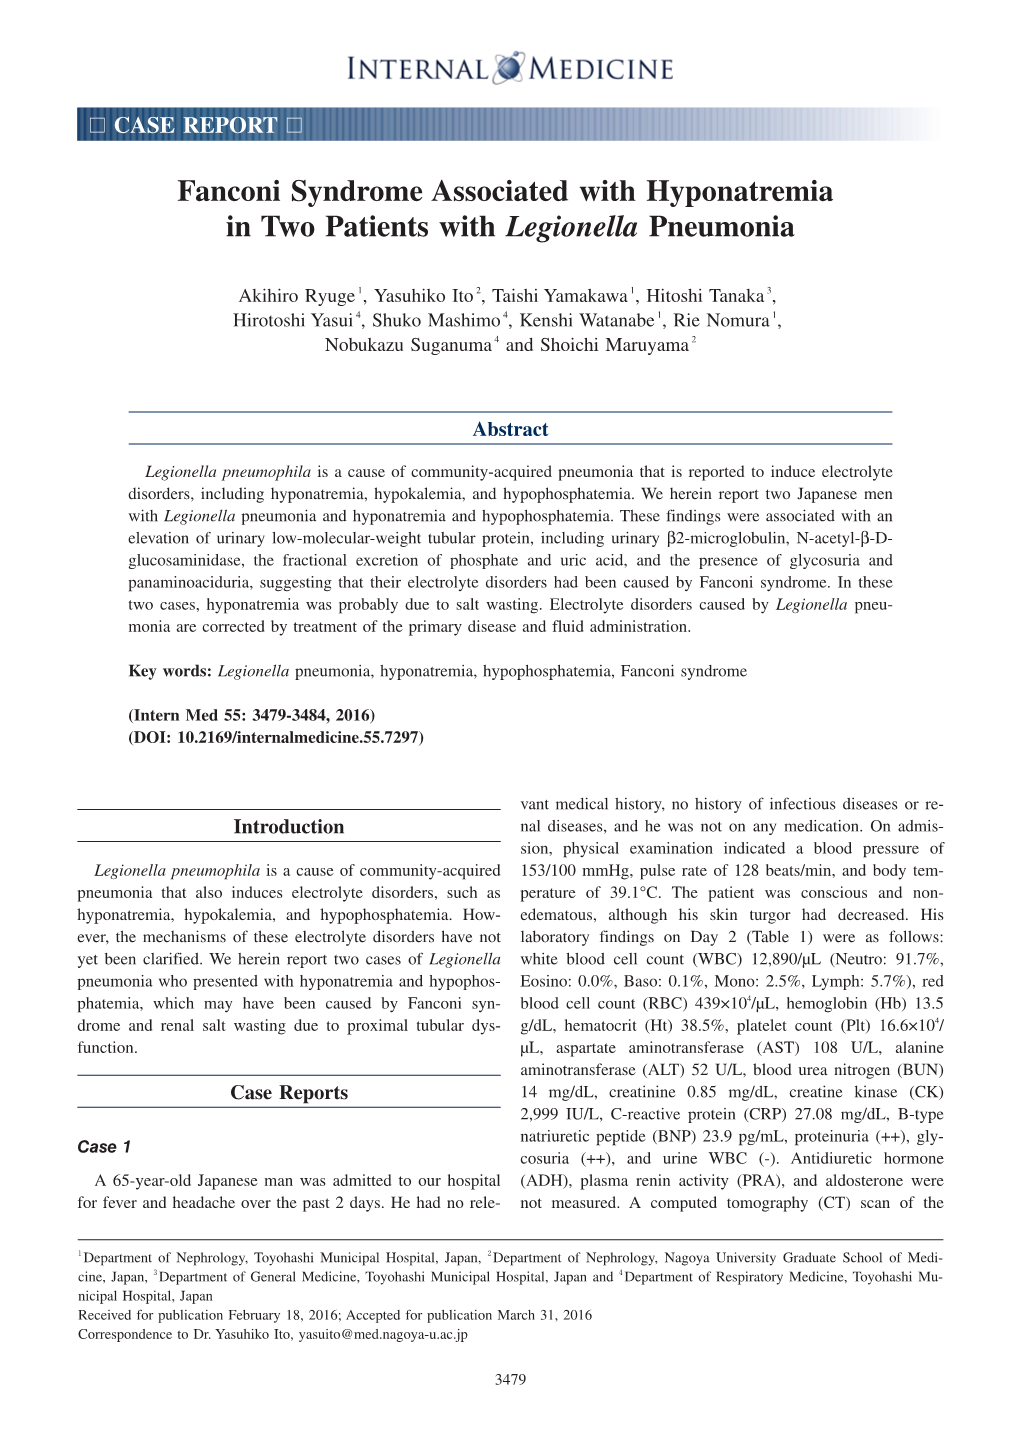 Fanconi Syndrome Associated with Hyponatremia in Two Patients with Legionella Pneumonia